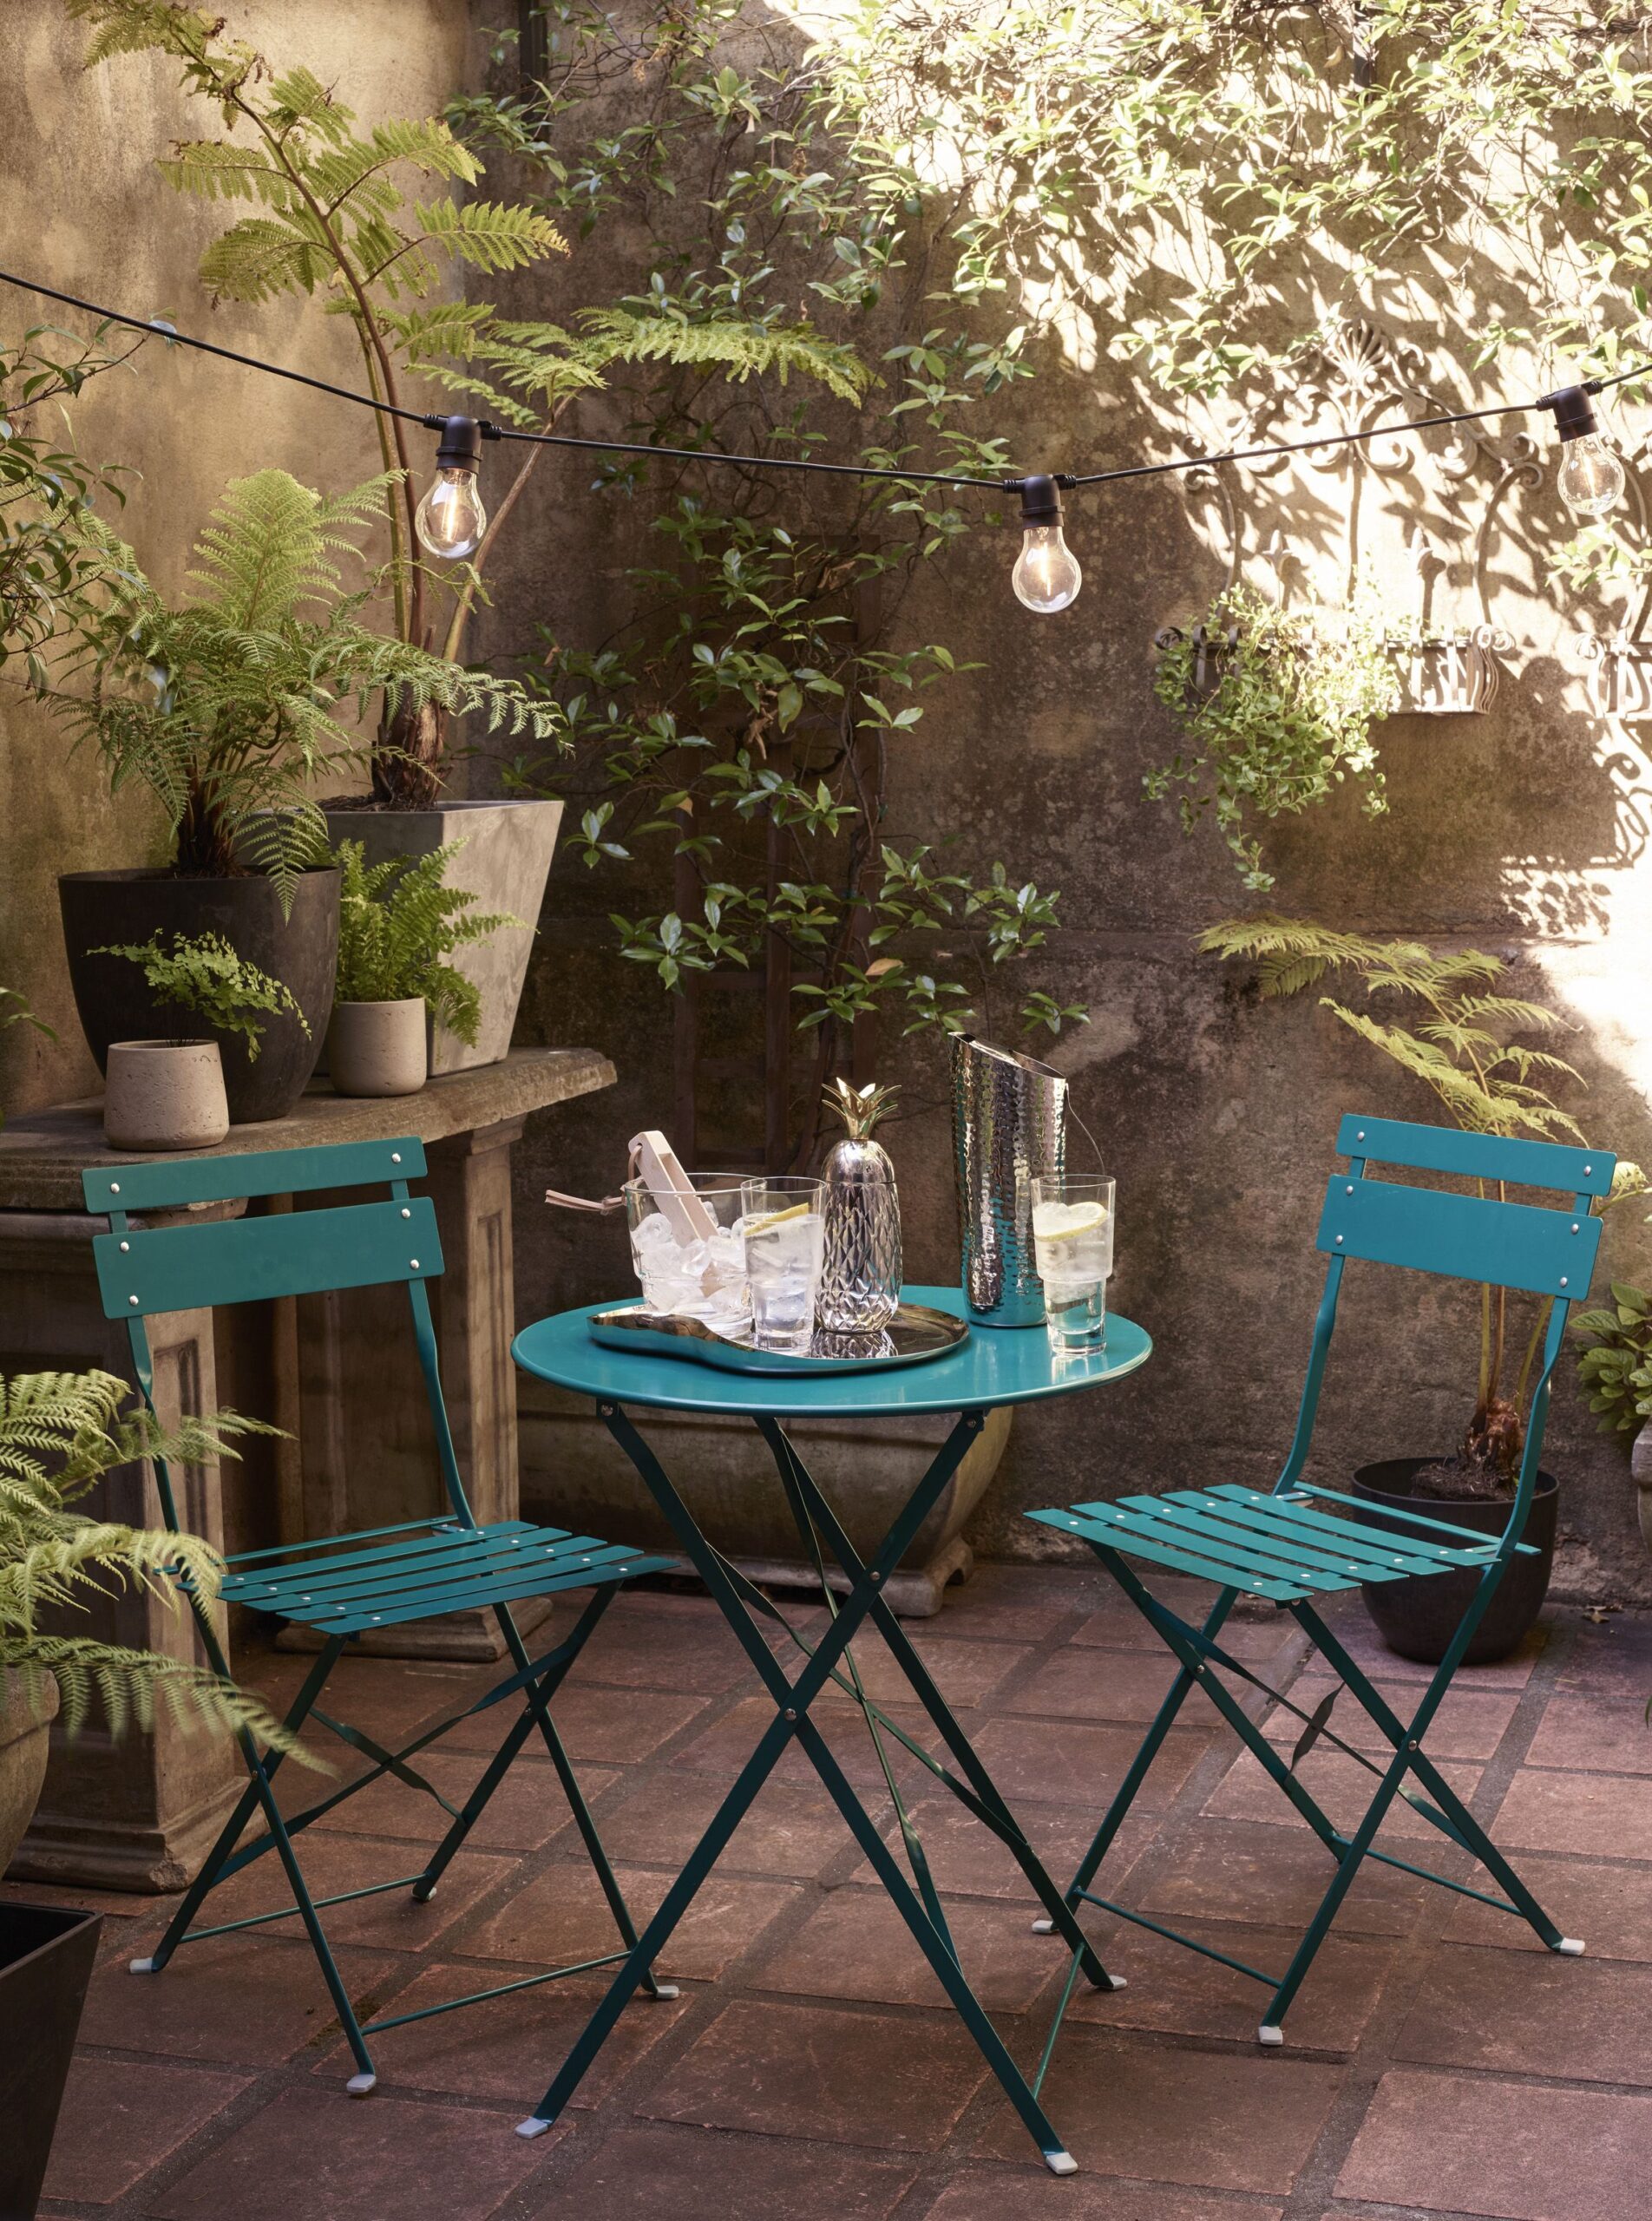 Relax in Style with Garden Chairs: Outdoor Comfort